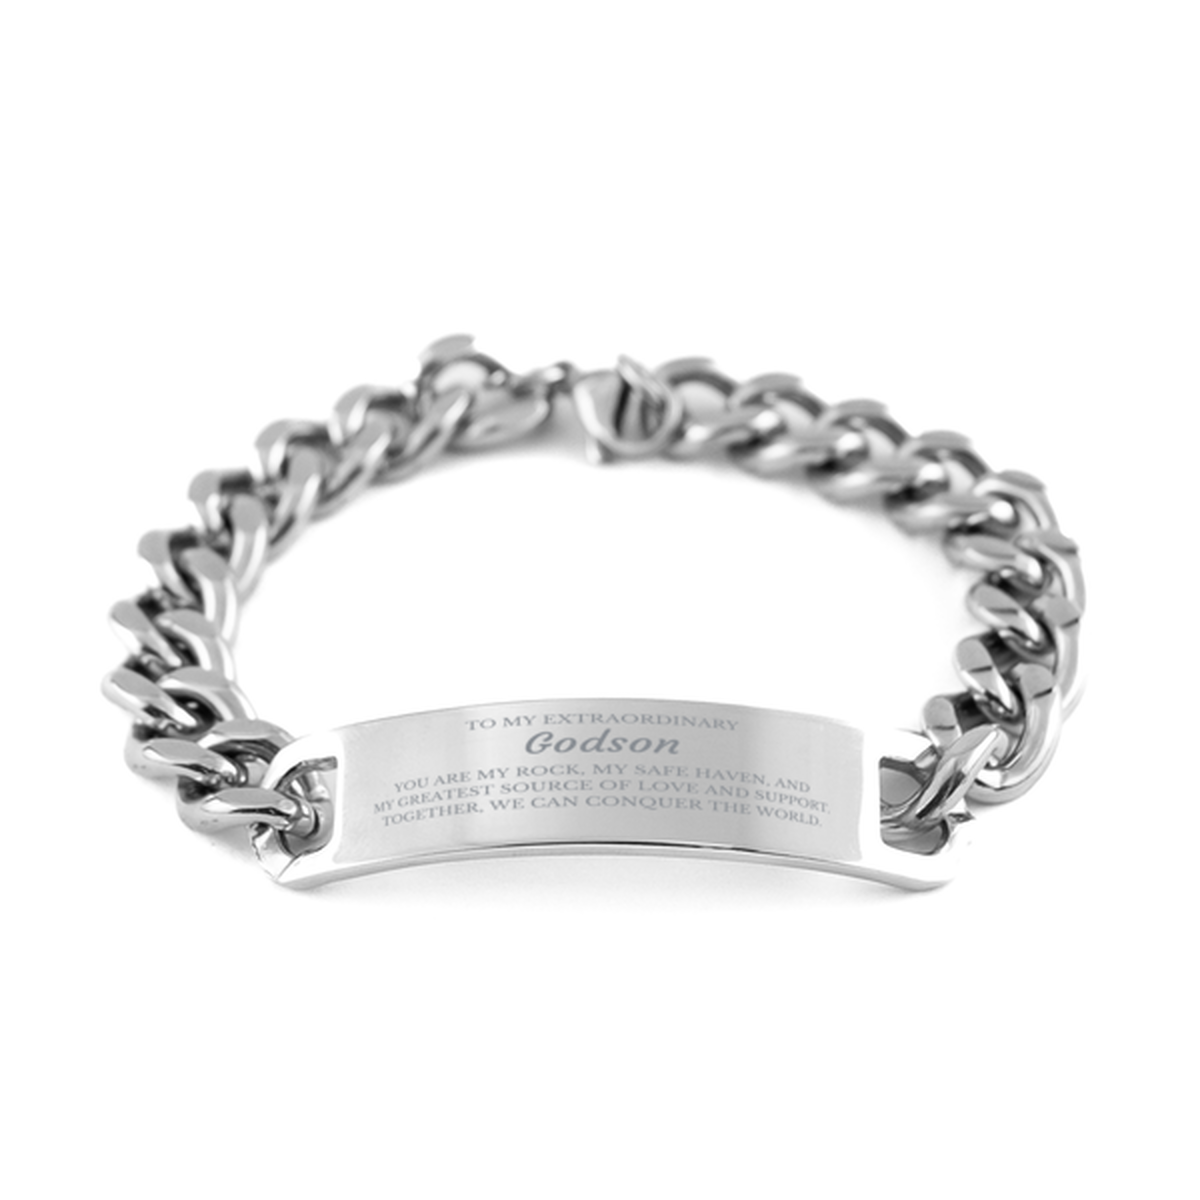 To My Extraordinary Godson Gifts, Together, we can conquer the world, Birthday Cuban Chain Stainless Steel Bracelet For Godson, Christmas Gifts For Godson